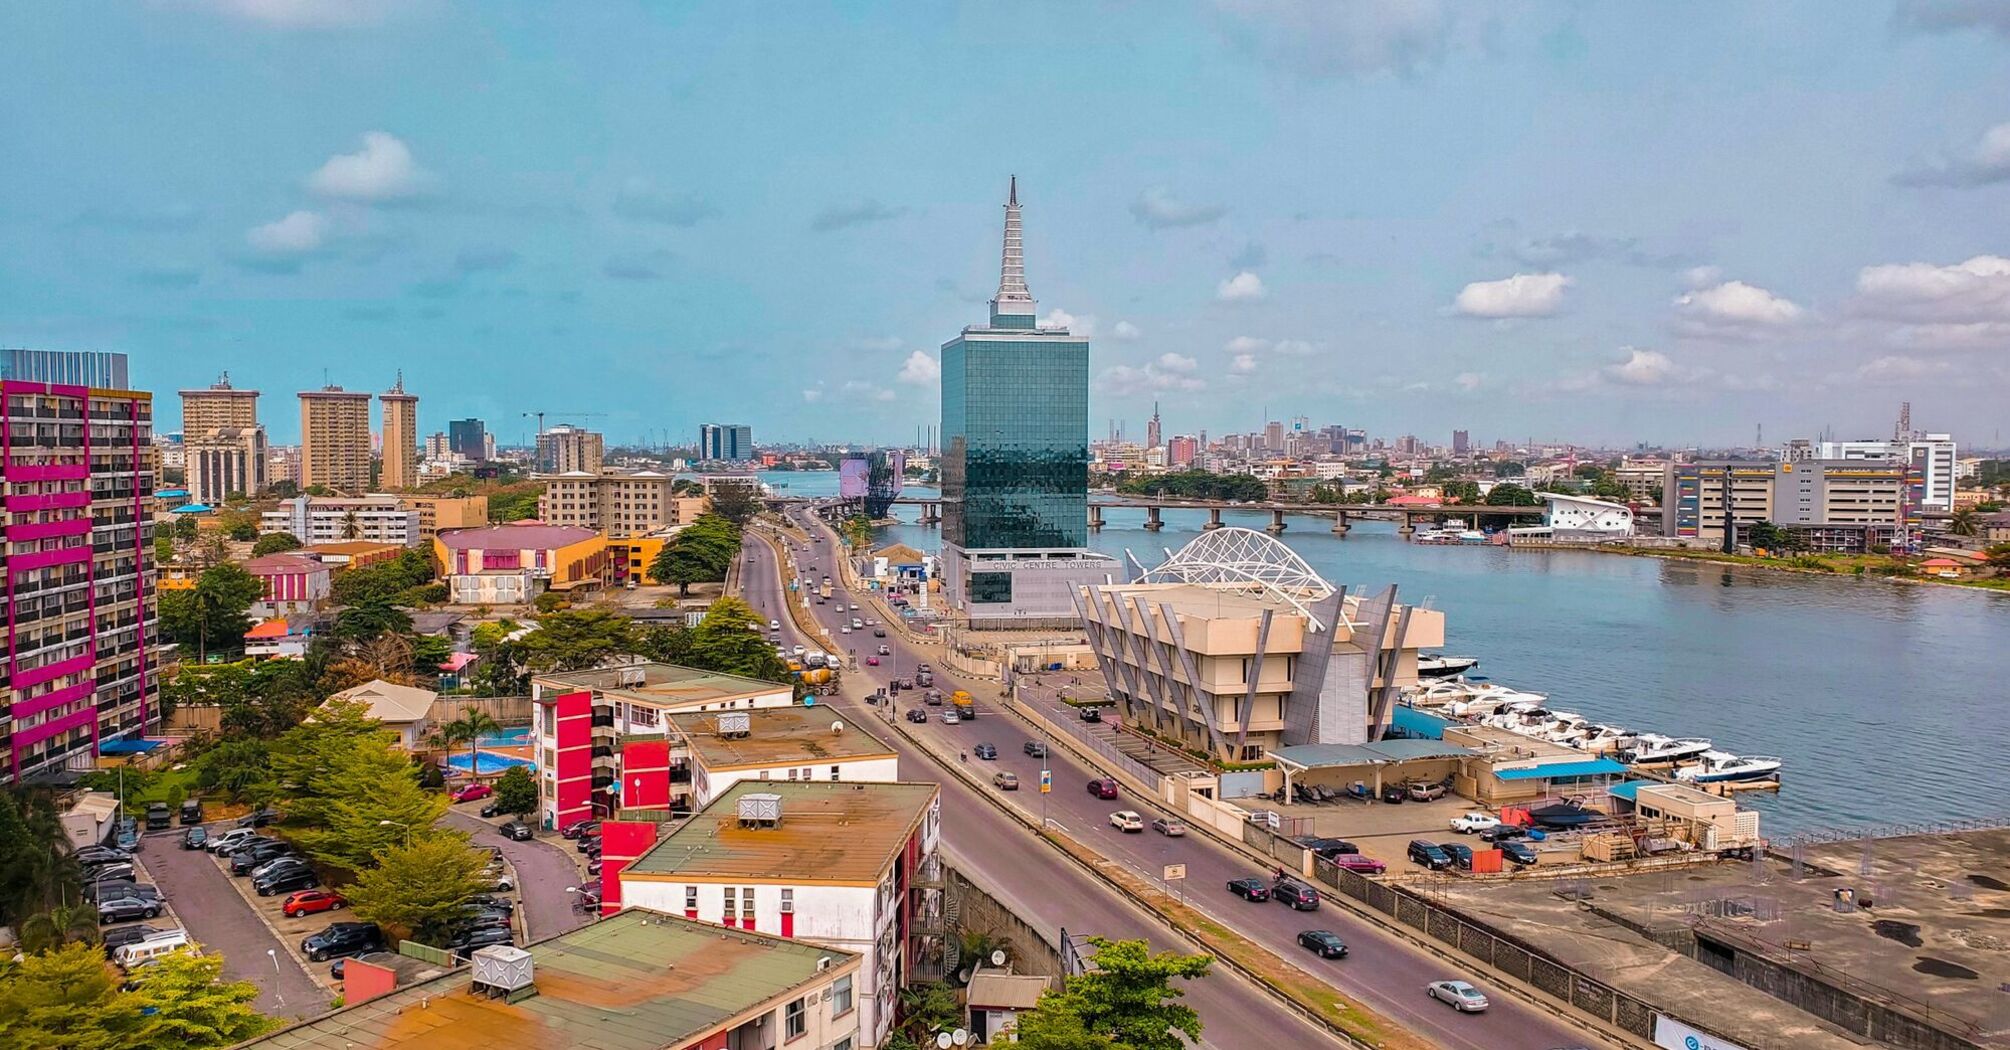 Aerial view of Lagos showcasing modern skyscrapers, bustling city streets, the calm Lagos Lagoon, and a clear blue sky